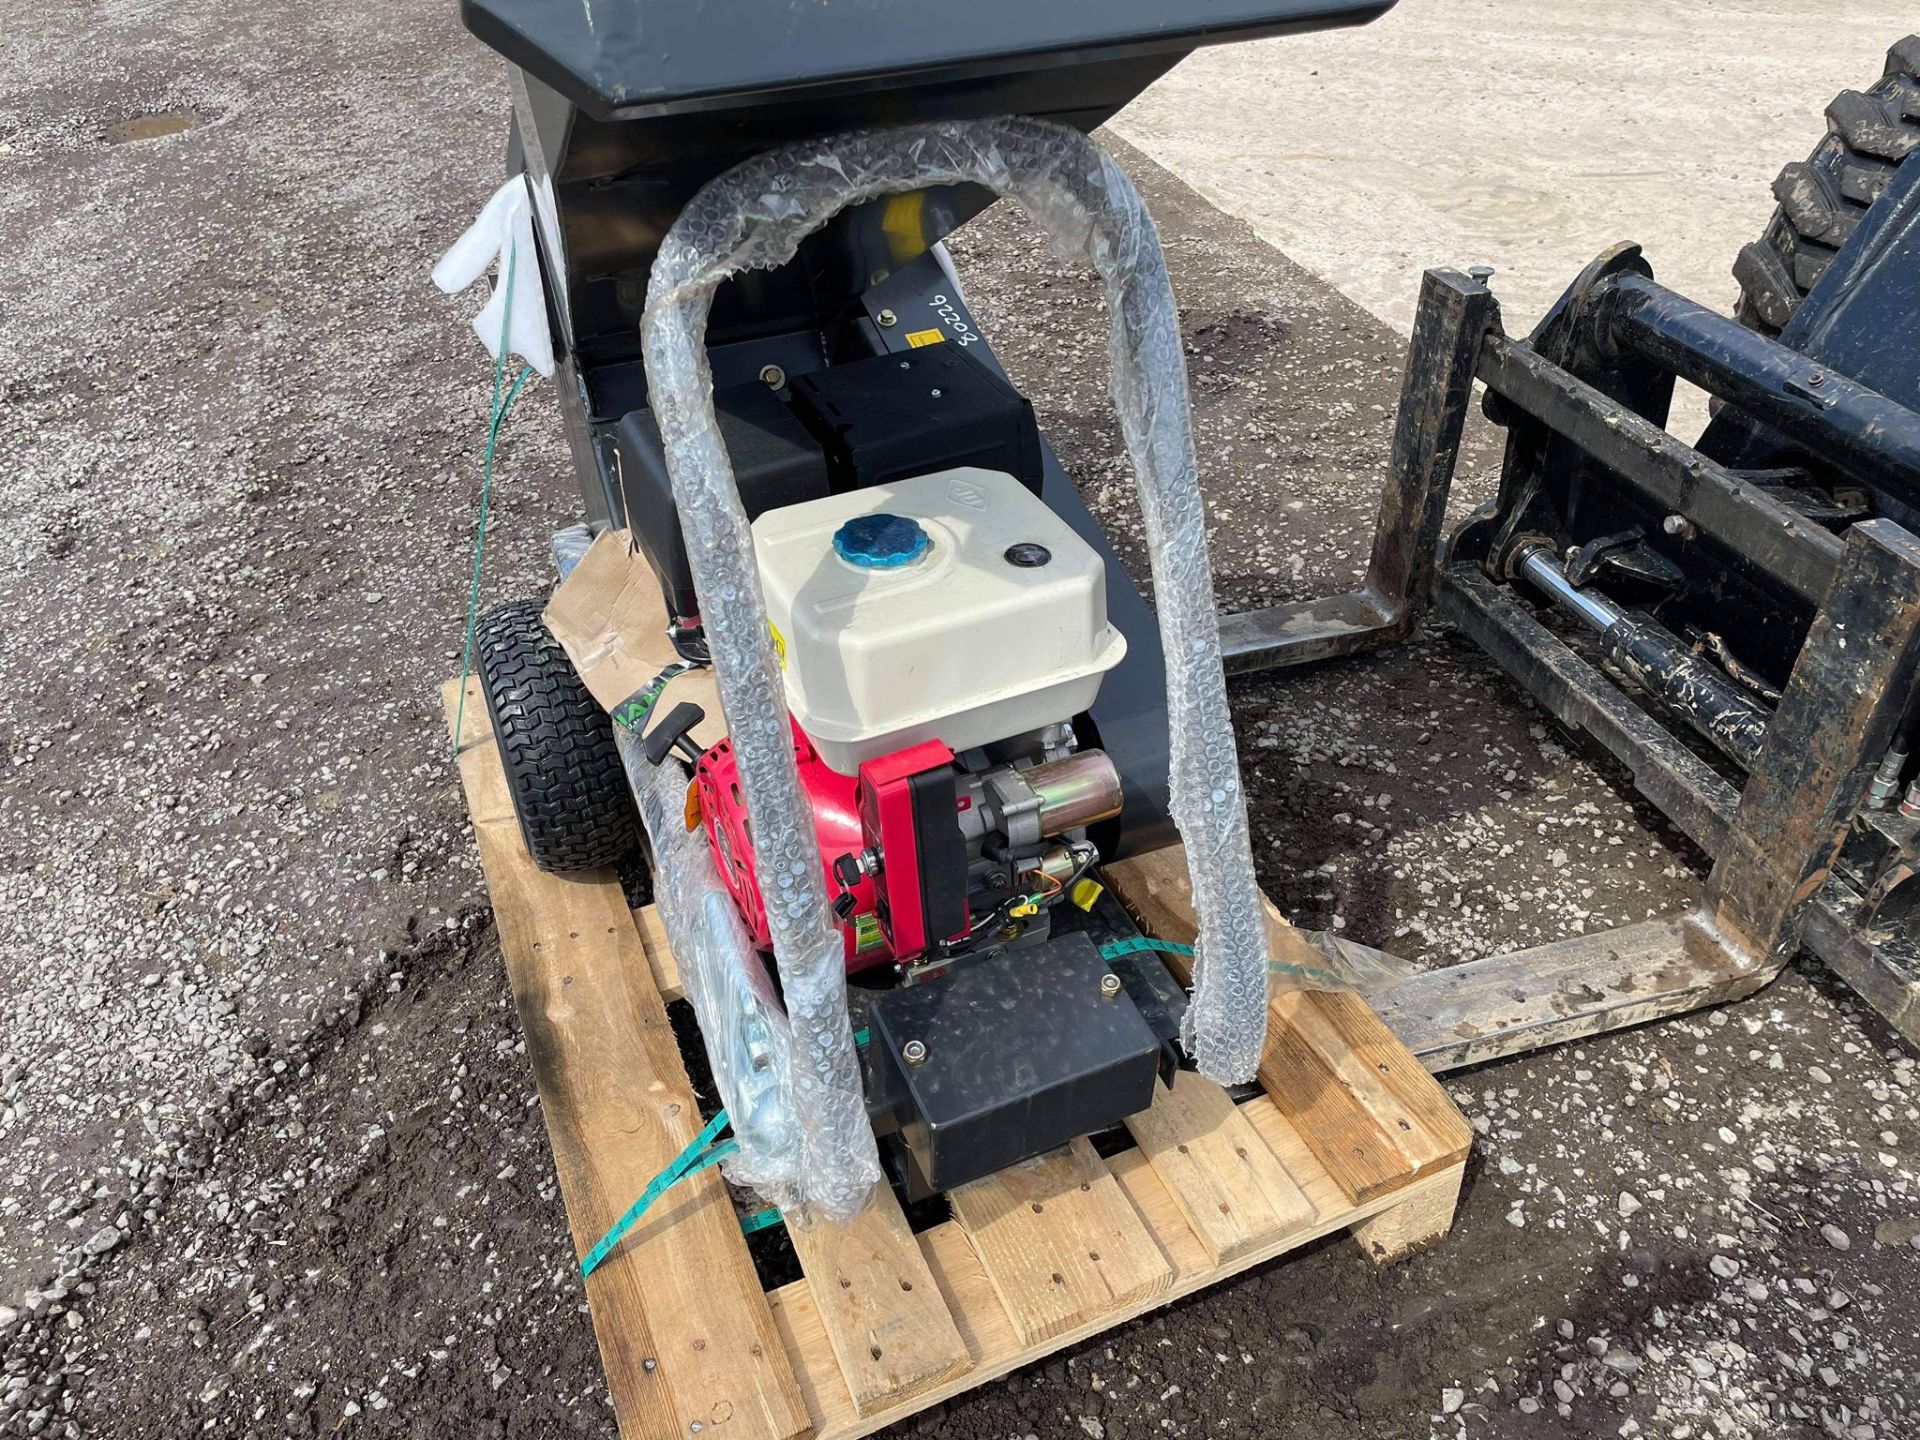 NEW AND UNUSED HANER HHE150E PETROL WOOD CHIPPER, ON WHEELS SO EASY TO MOVE AROUND *PLUS VAT* - Image 4 of 9